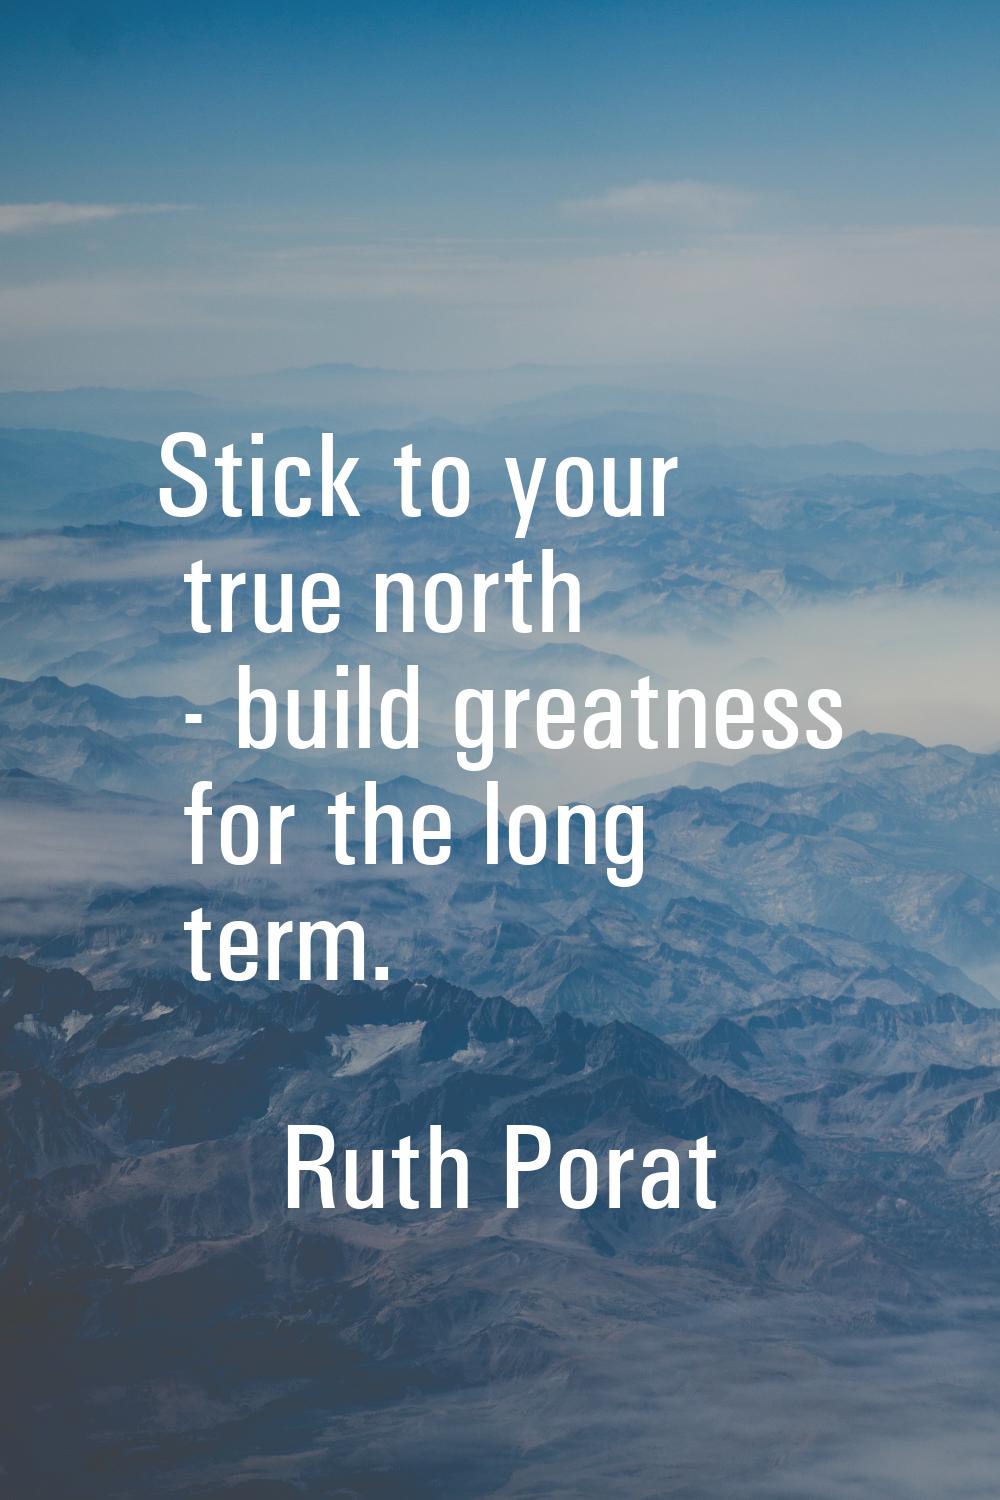 Stick to your true north - build greatness for the long term.